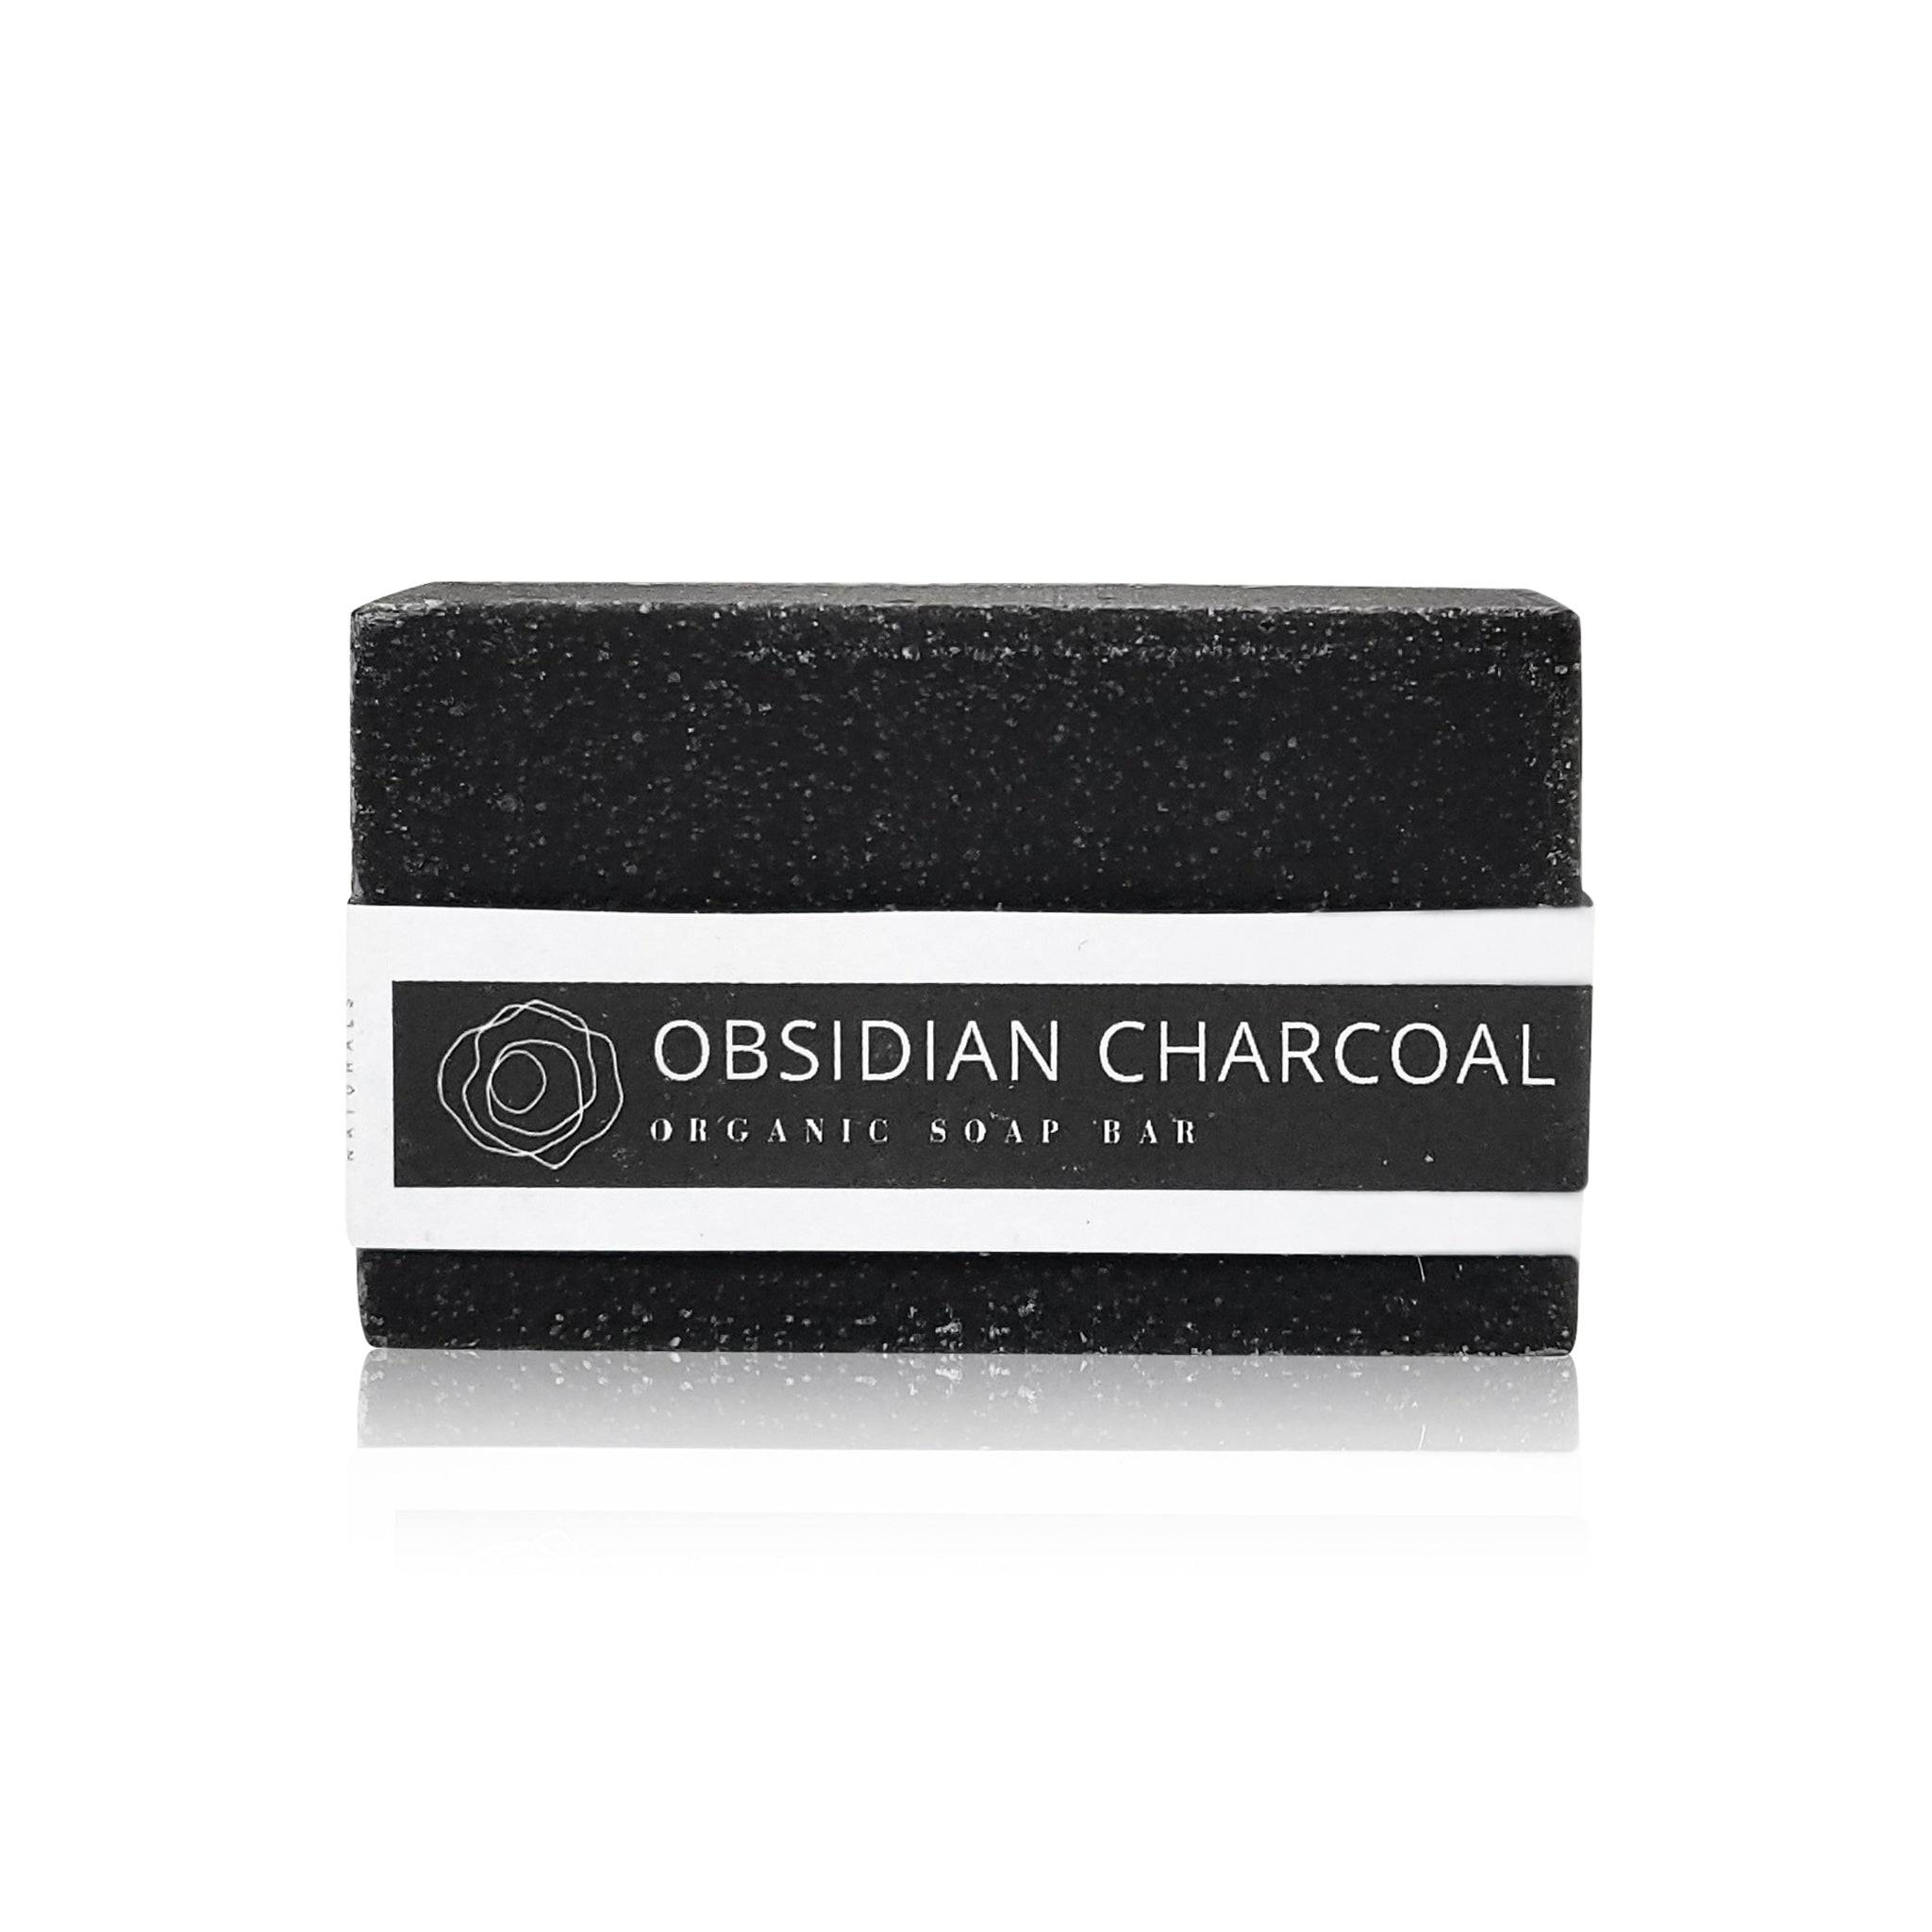 Obsidian Charcoal Organic Soap Bar - The Gilded Witch